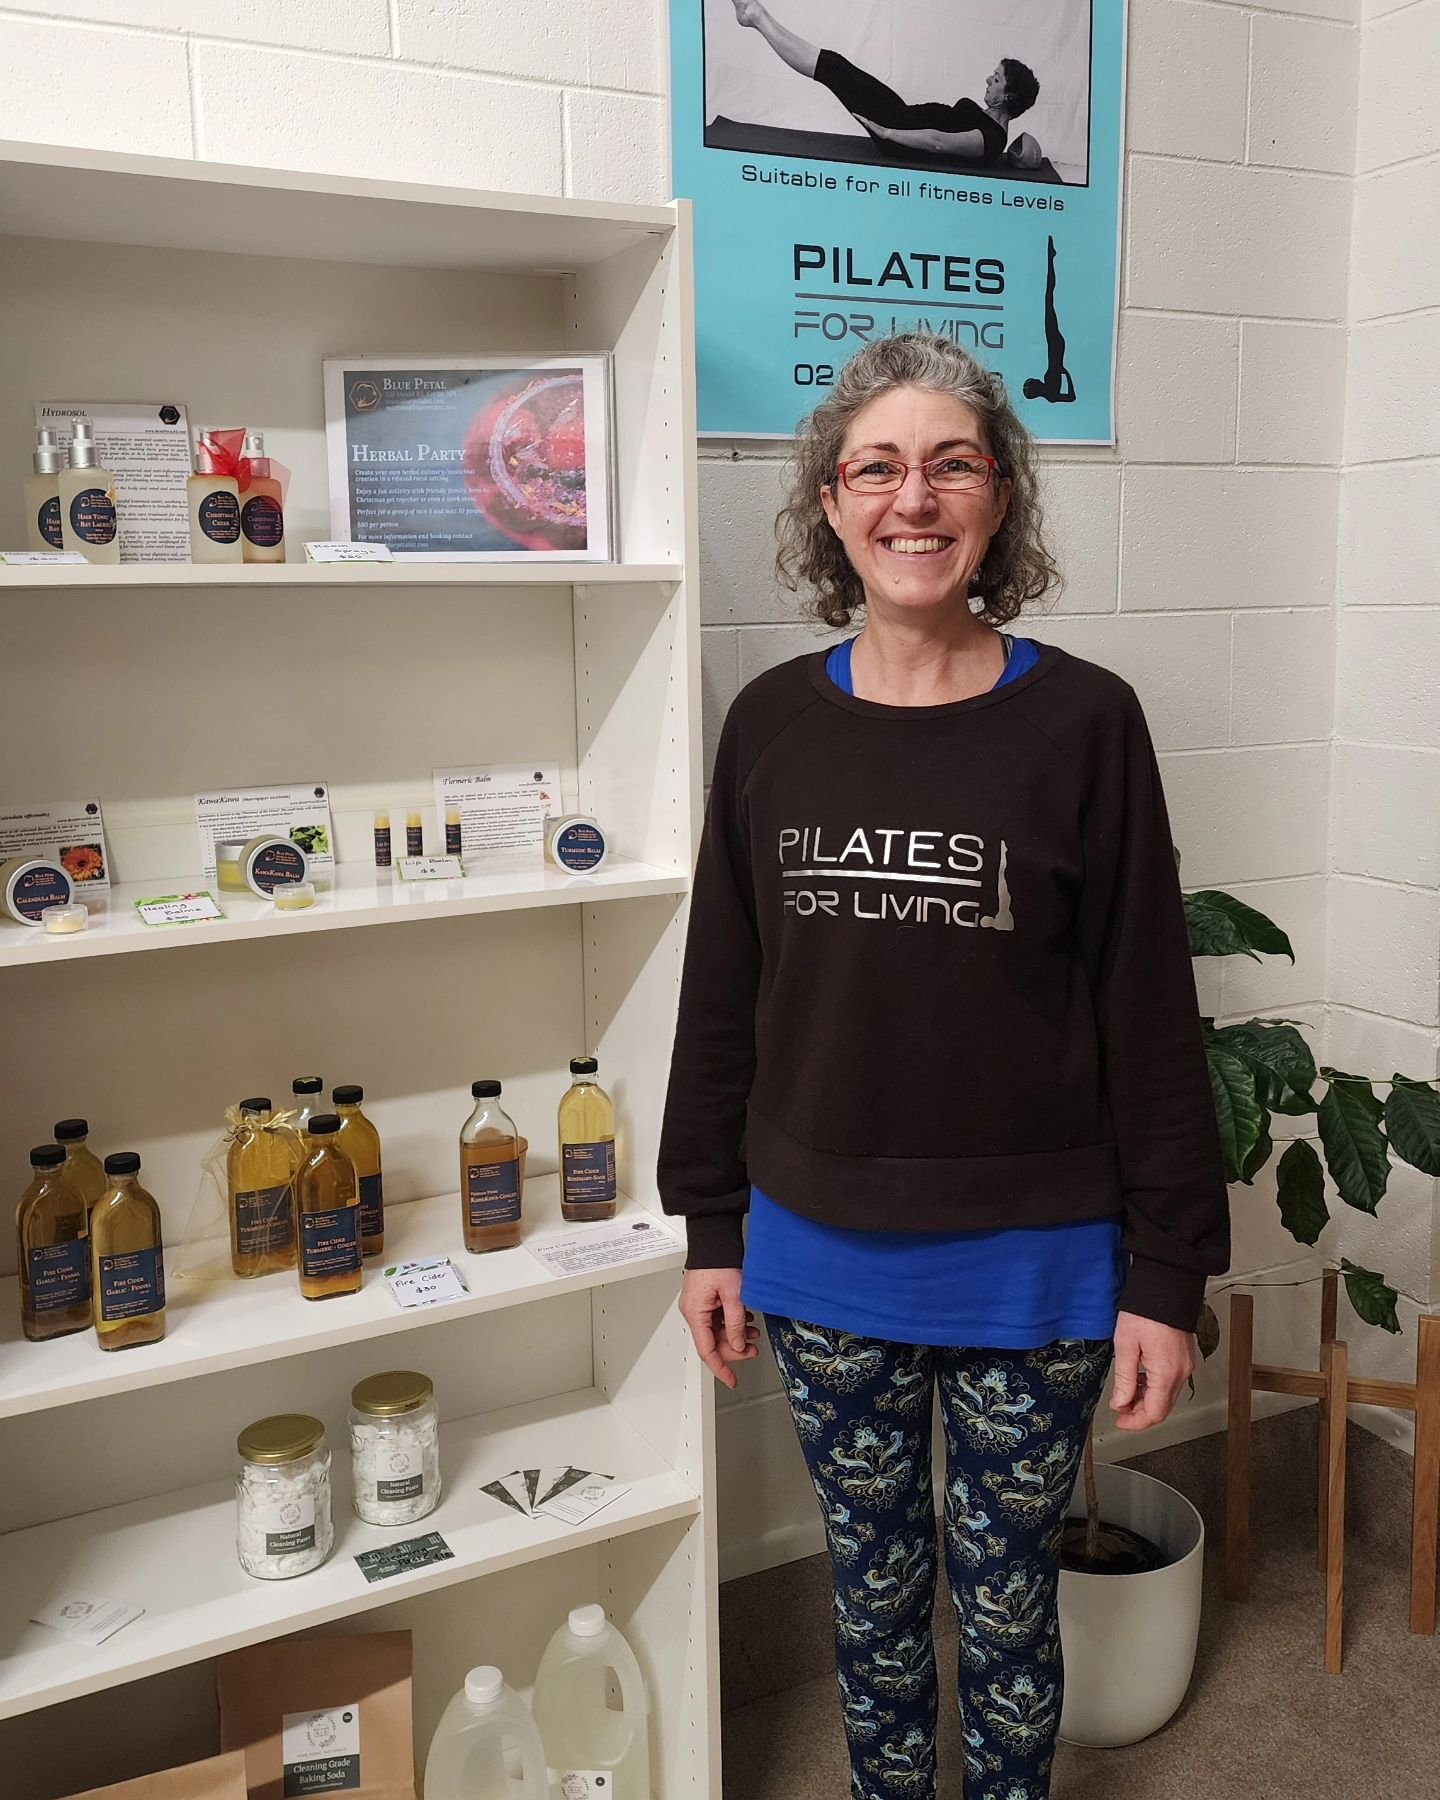 🎉Super excited to announce that my lovely friend Phillippa has some of my products in her retail space @pilates4living ! 

🌻Phillippa can teach you so many amazing things about your body and the impact of environmental toxins on it. She supports th